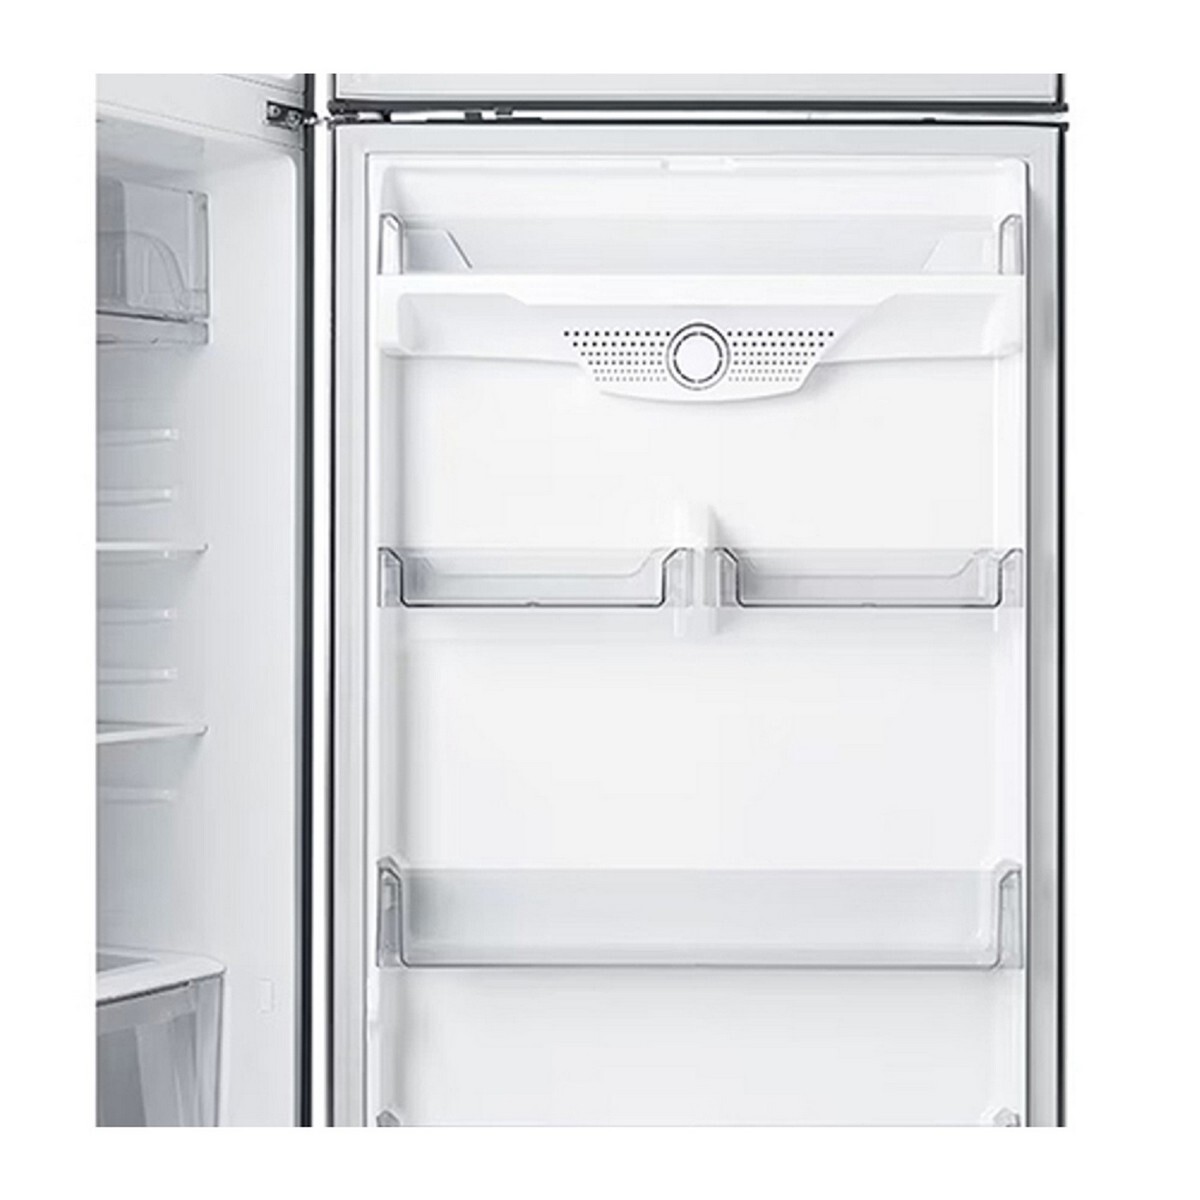 LG Refrigerator Frost Free H702HLHM 506L Shiny Steel